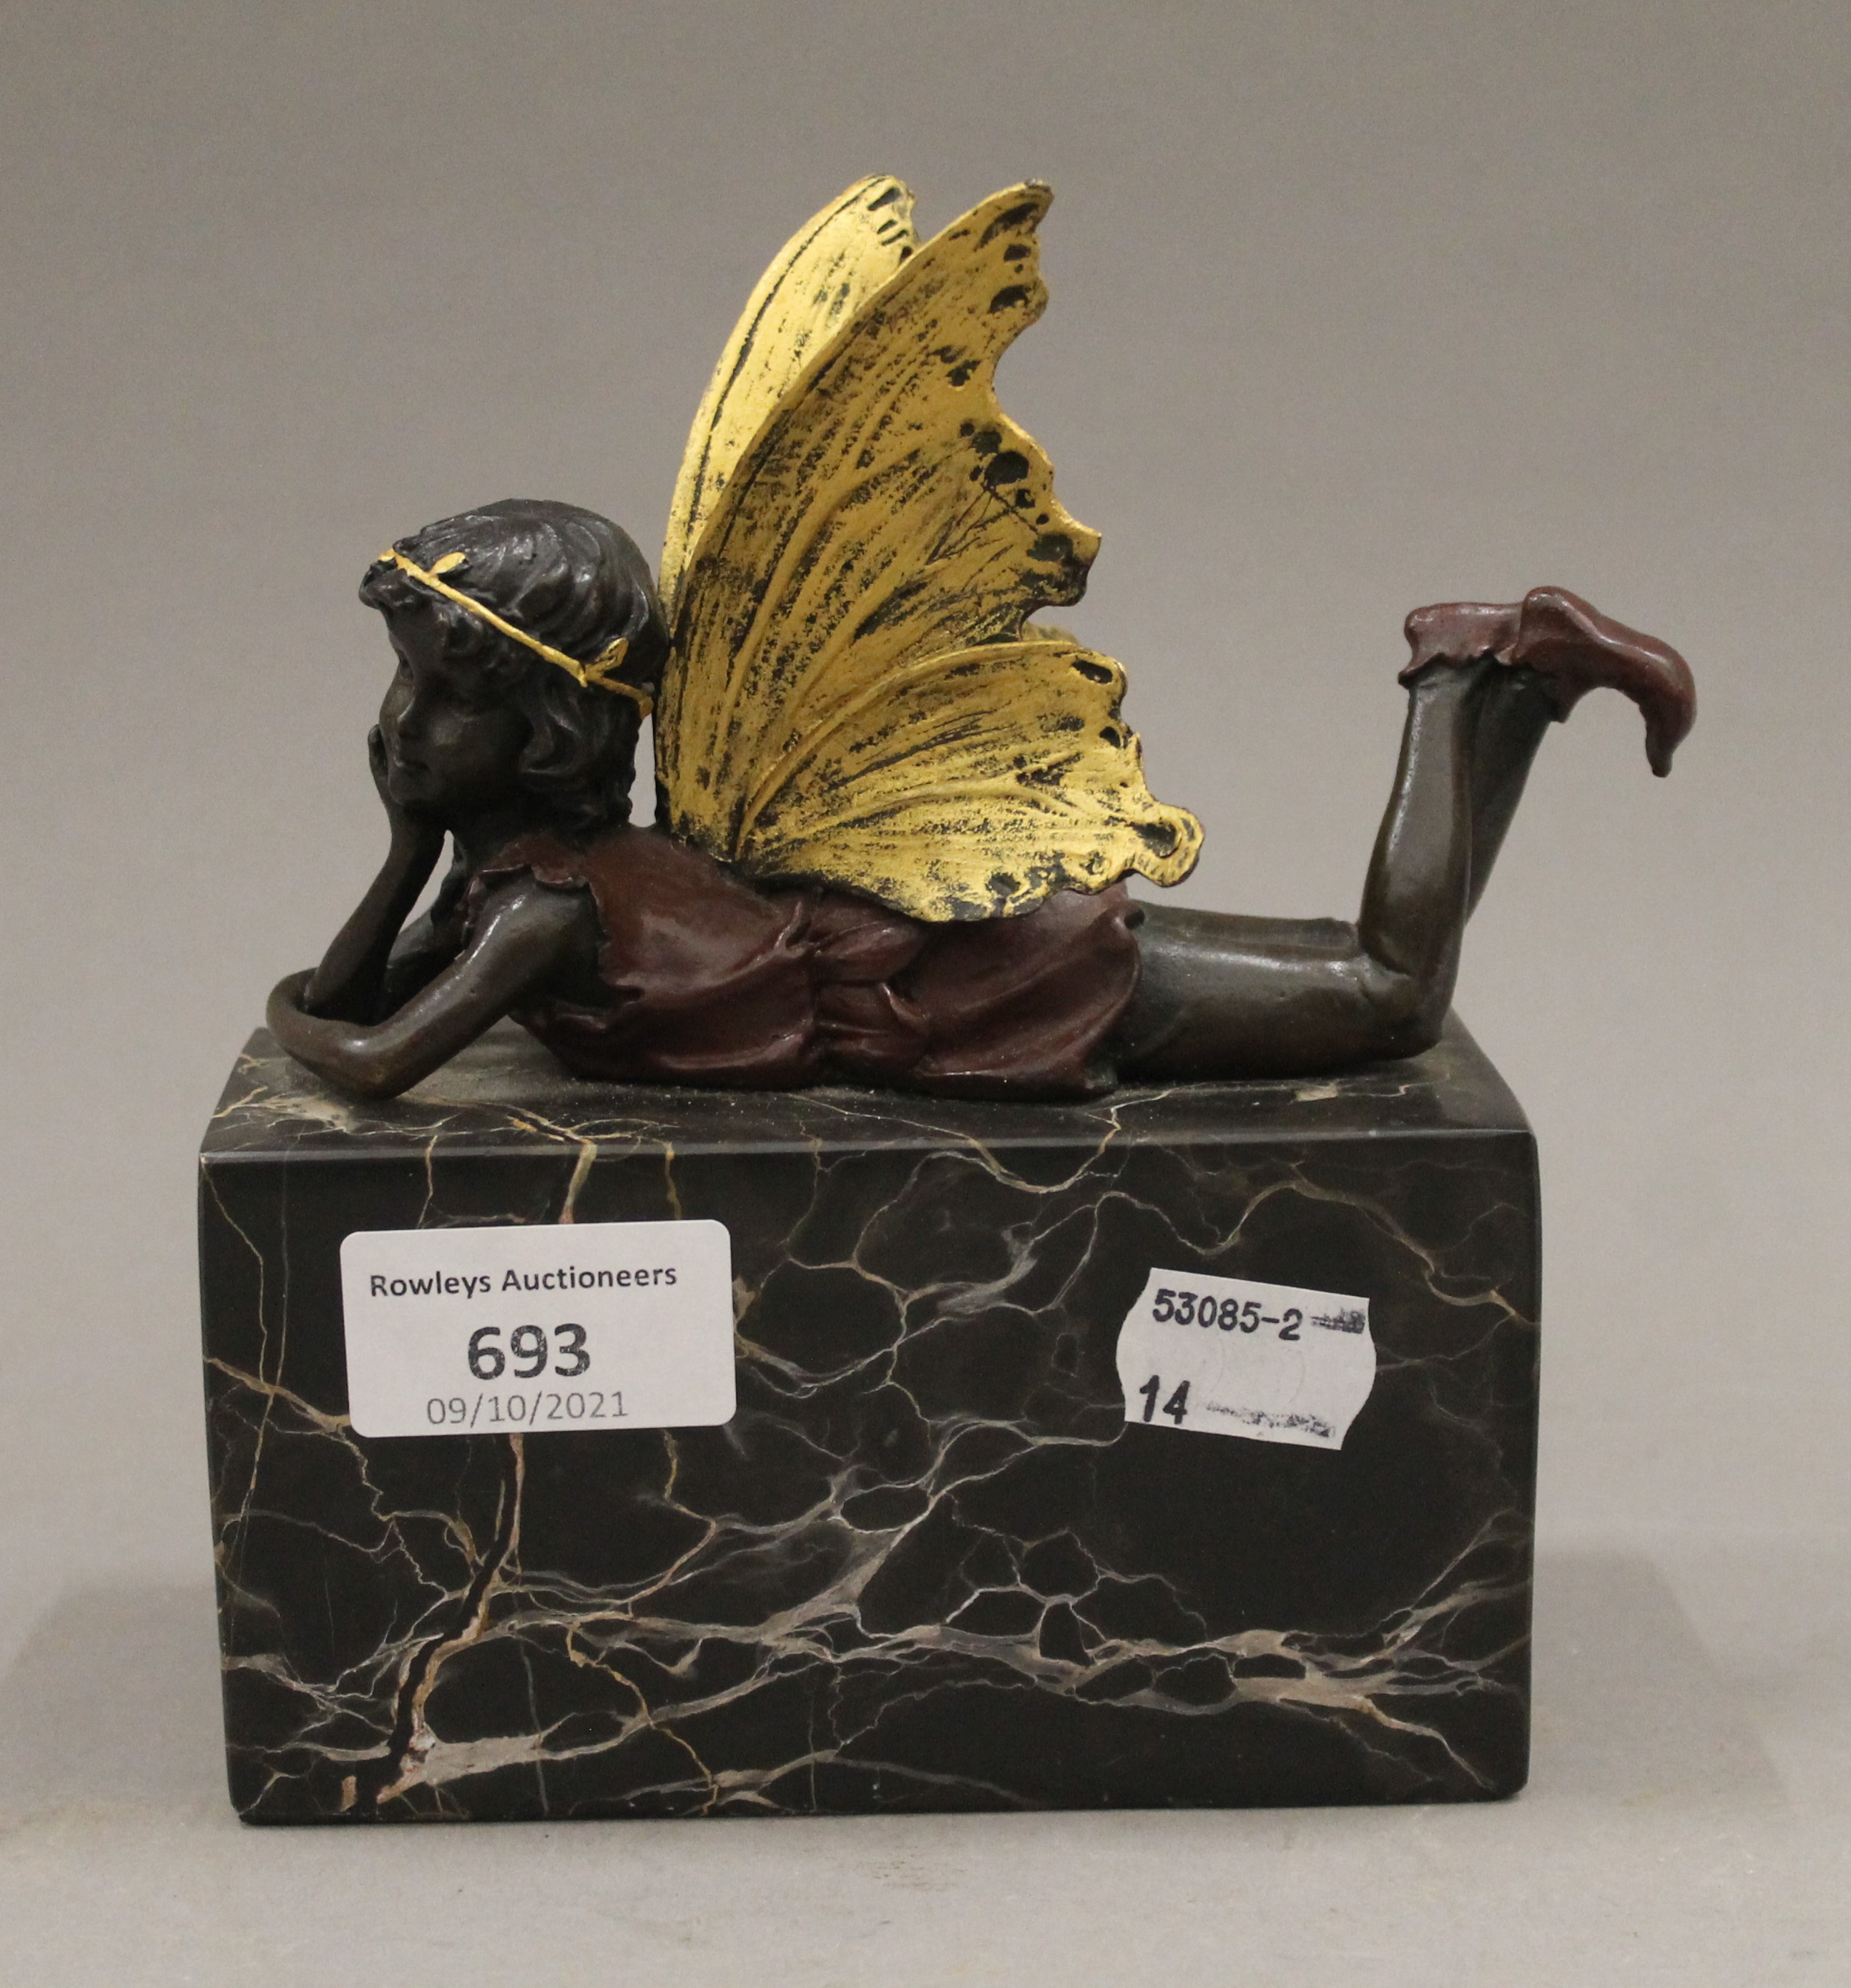 A bronze model of a pixie on a marble base. 13 cm long.